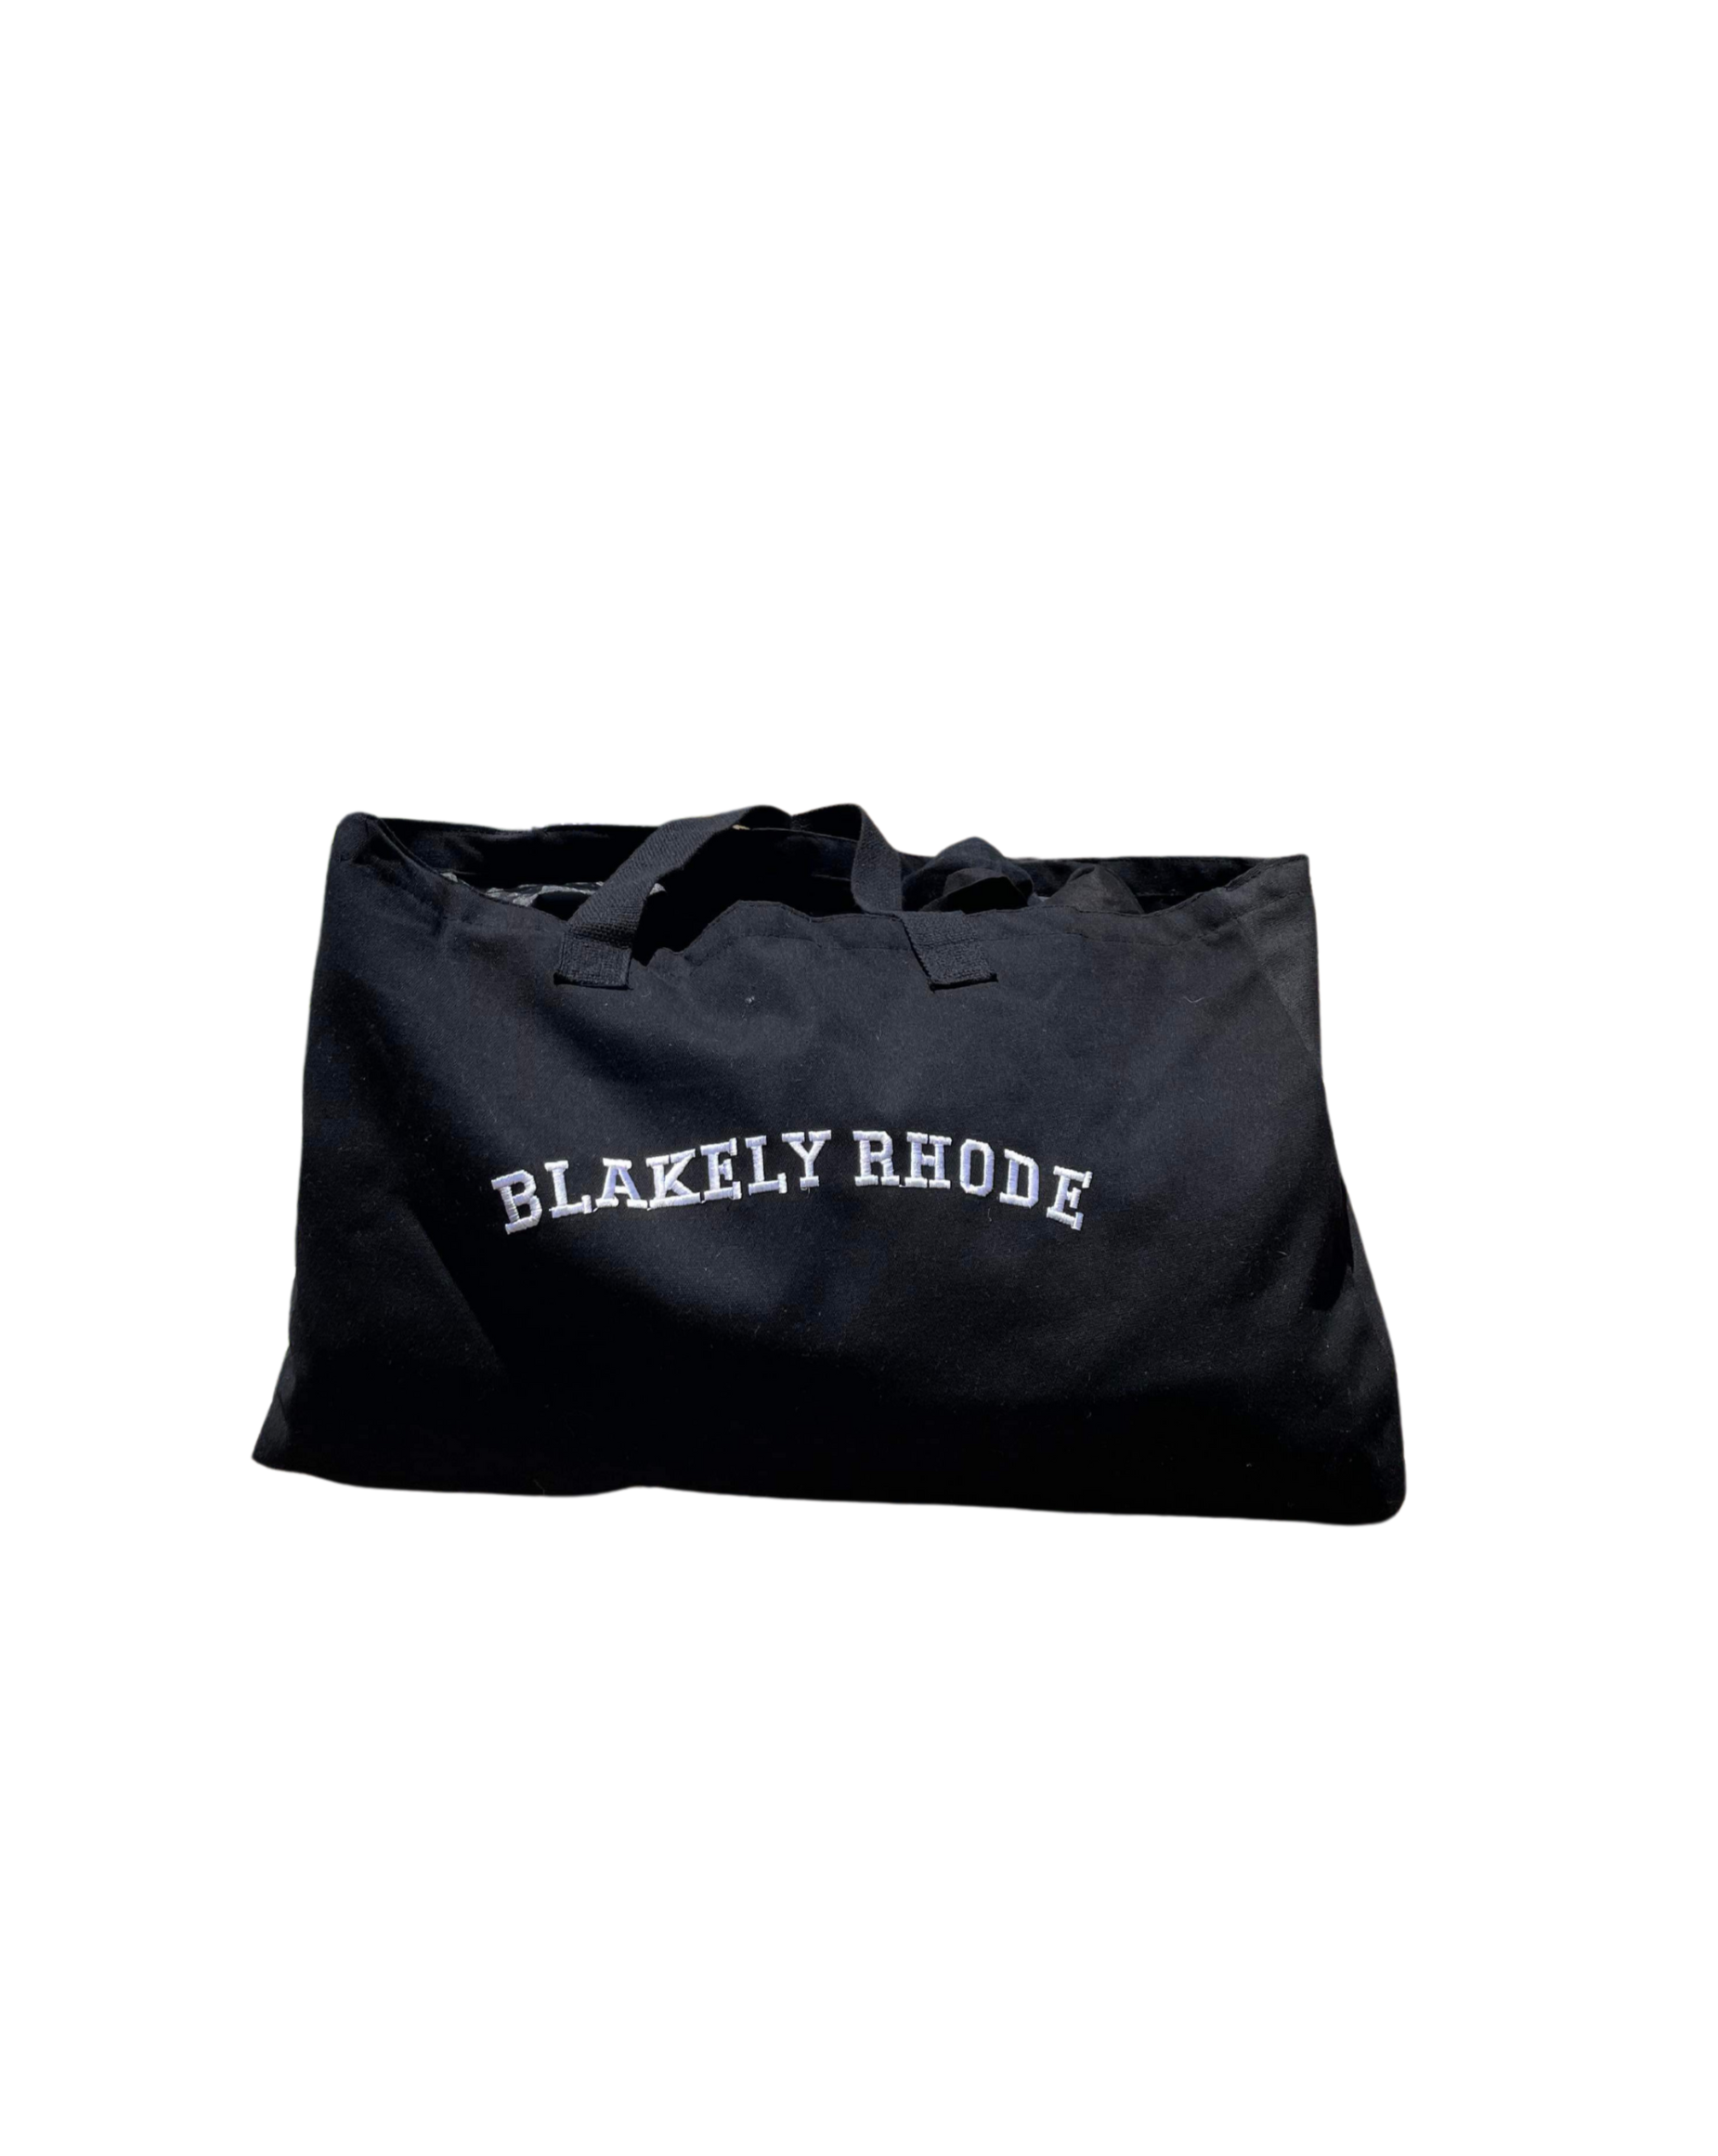 Blakely Rhode Vacation Canvas Tote Black + White